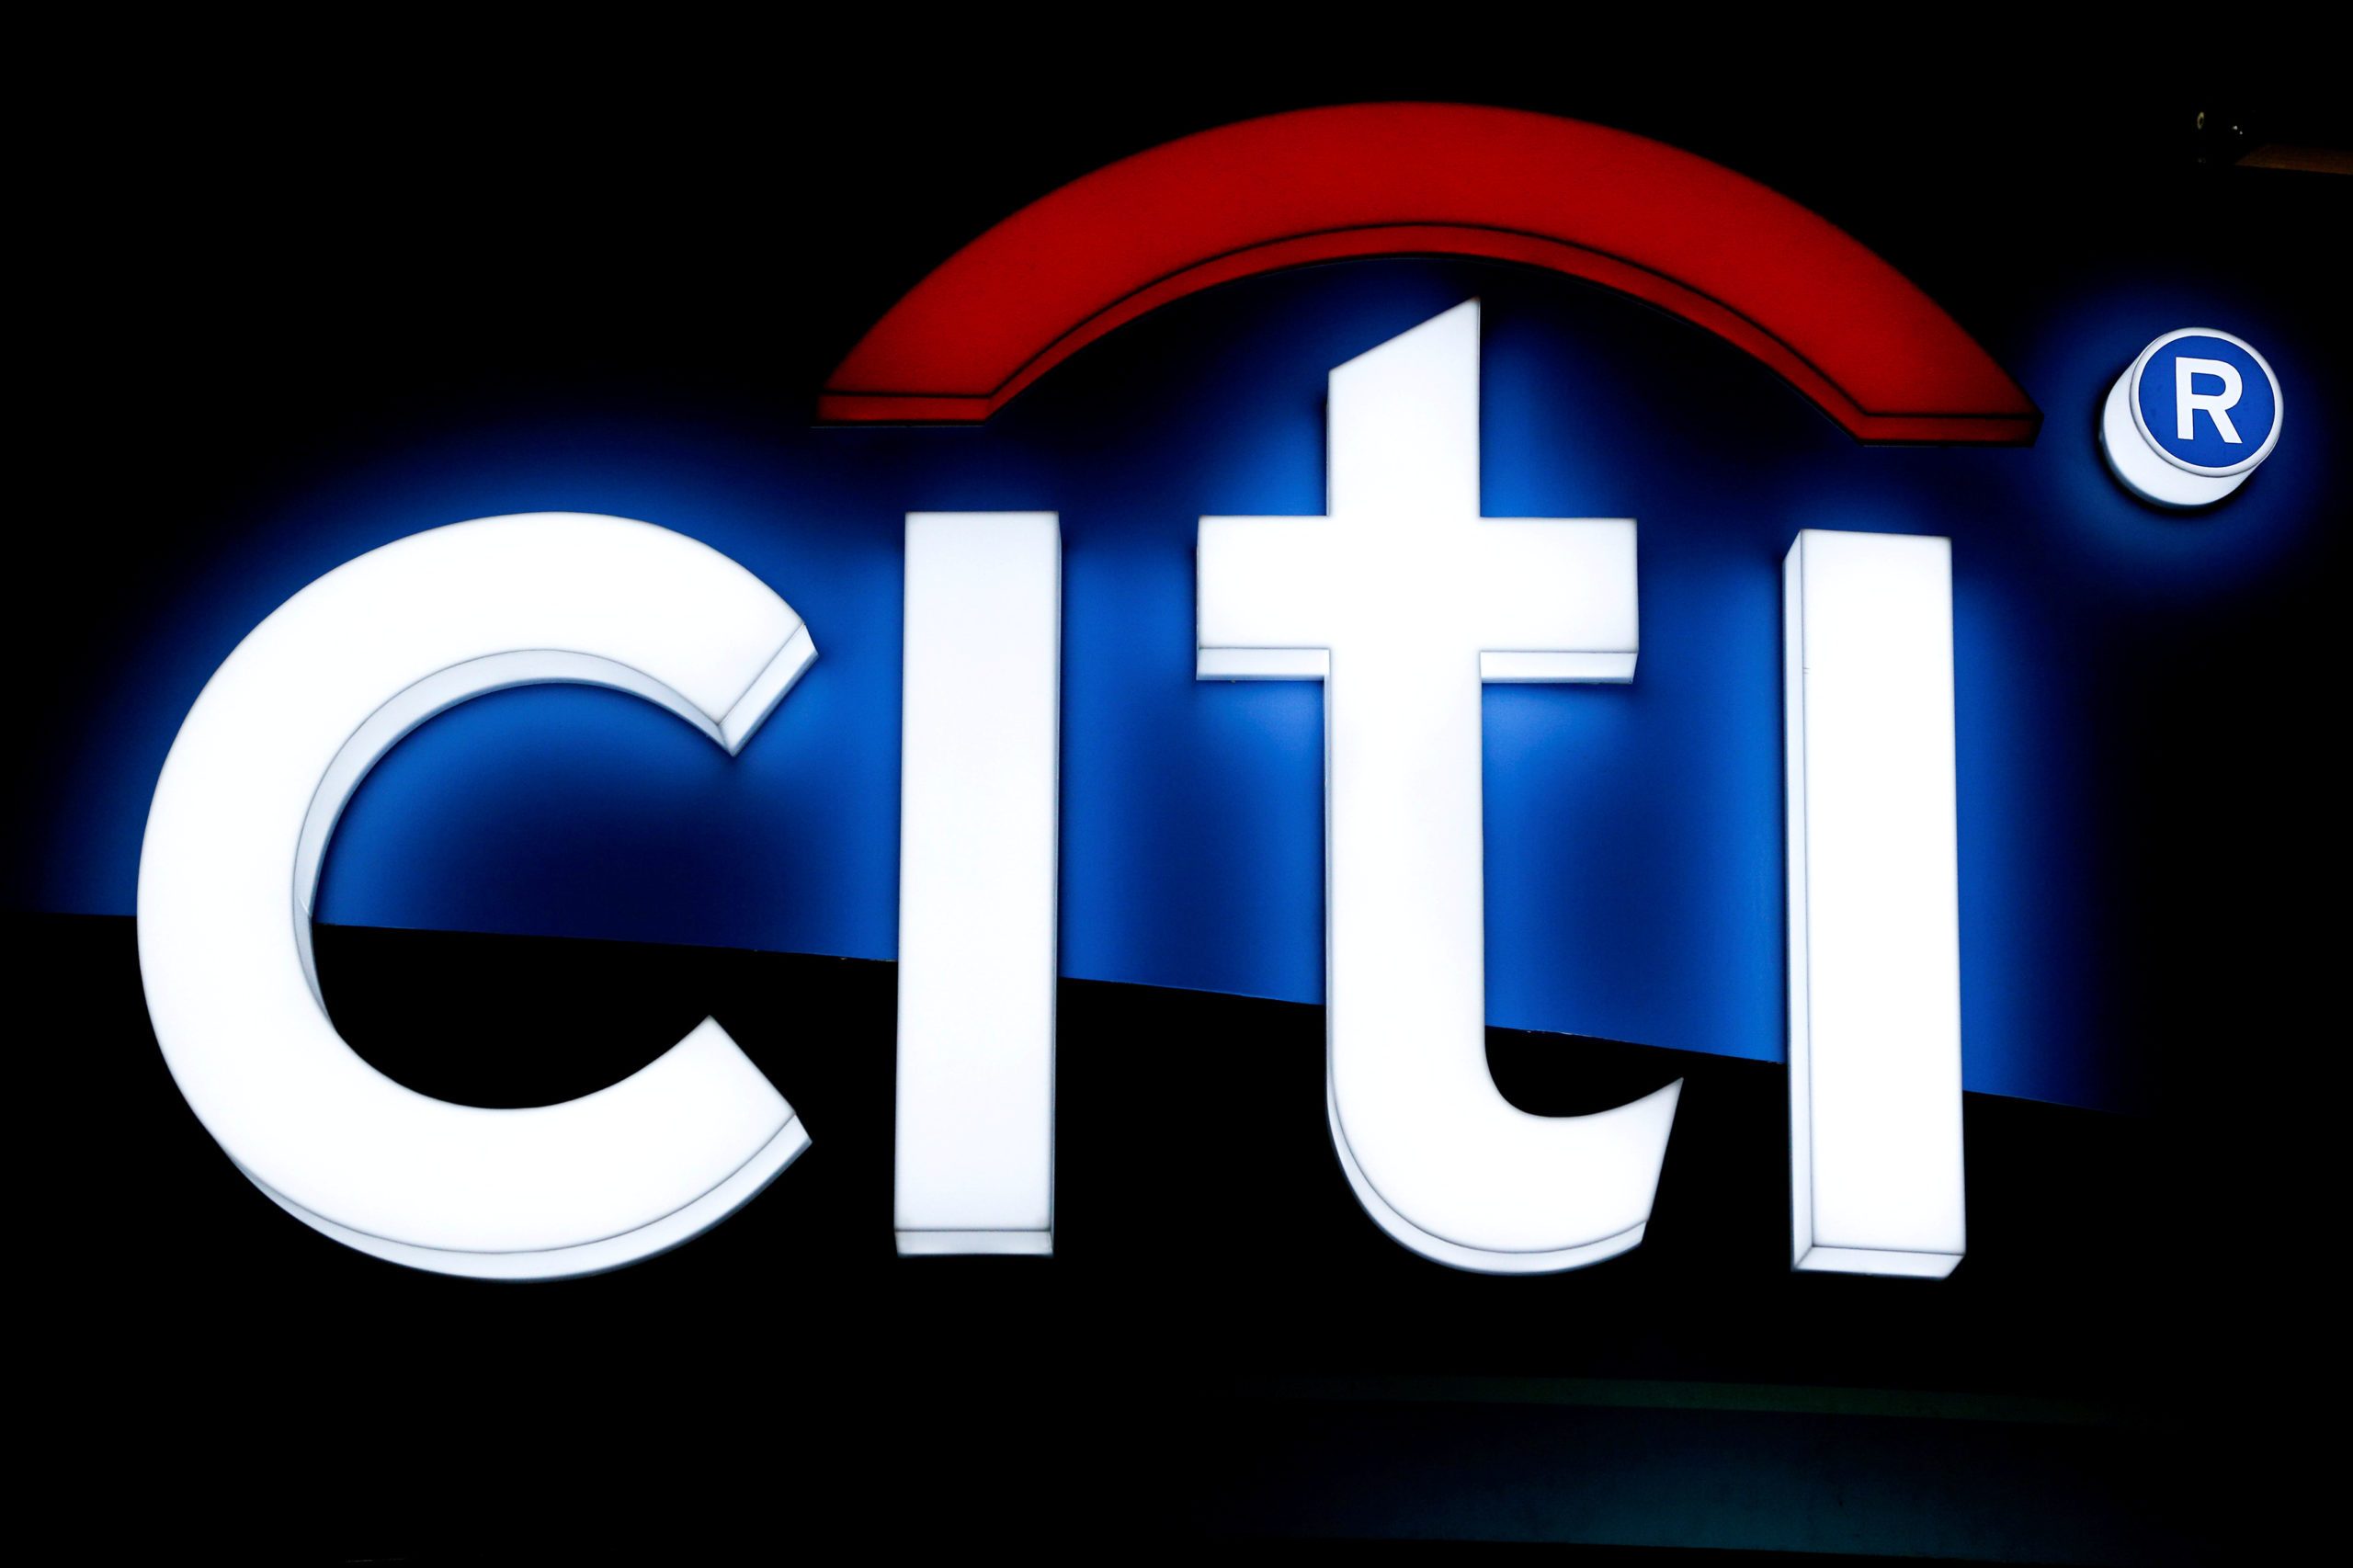 Citi makes new APAC appointments as part of sweeping global reorganisation